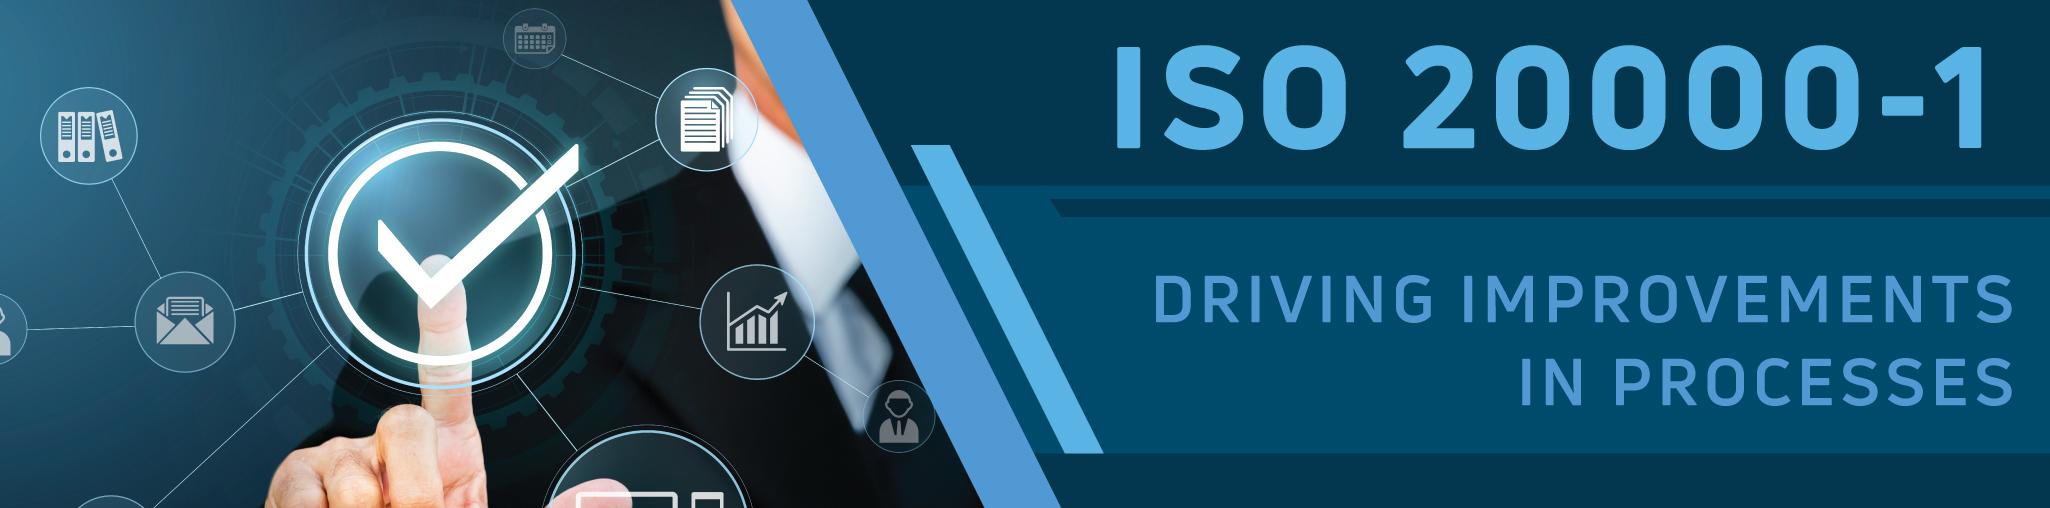 ISO 20000-1 Driving Improvements in Processes